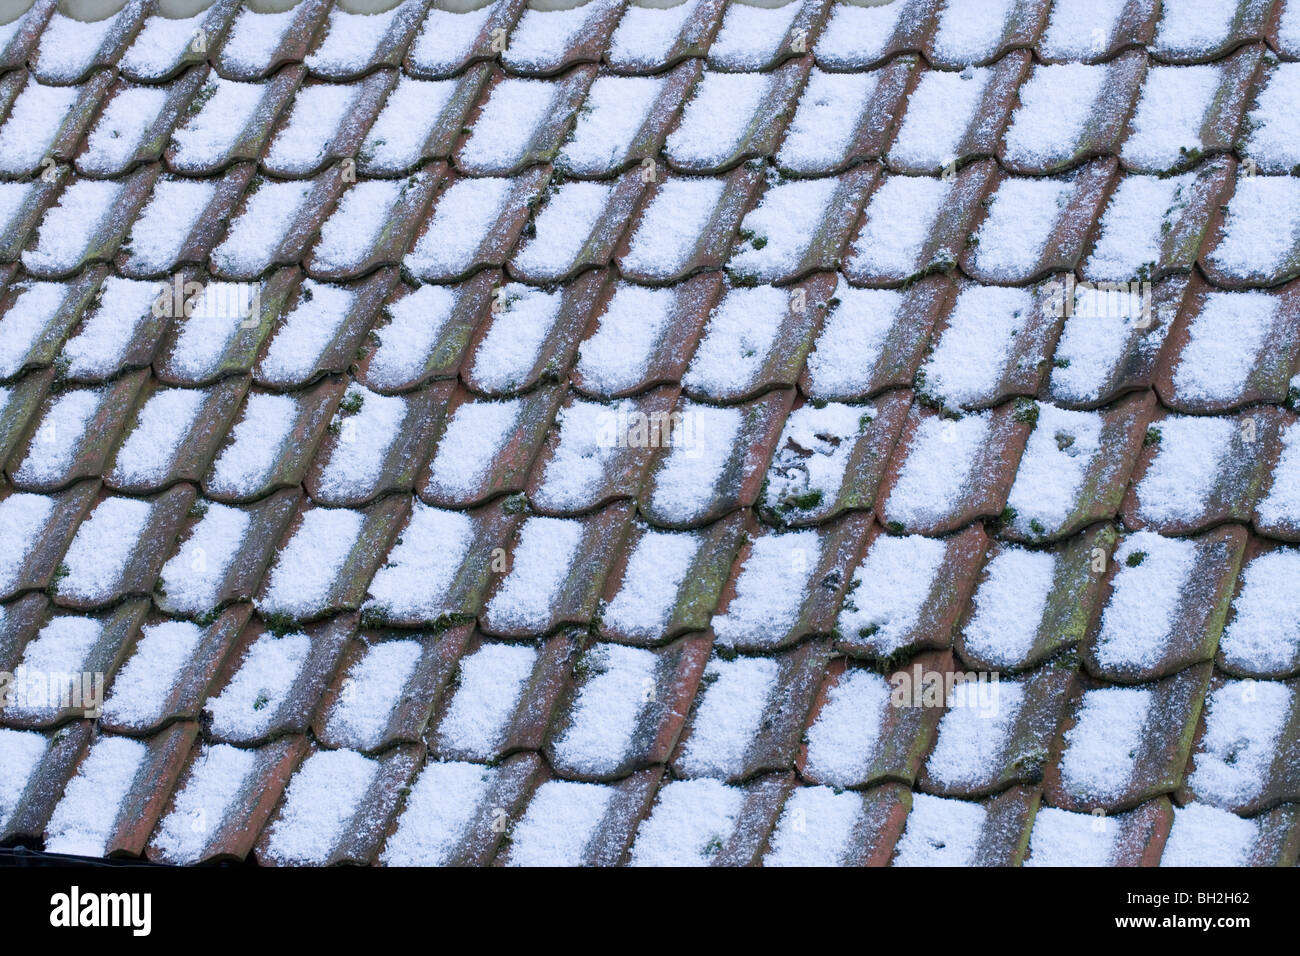 Snow and hail stones on Pantile roof of an outbuilding. Stock Photo